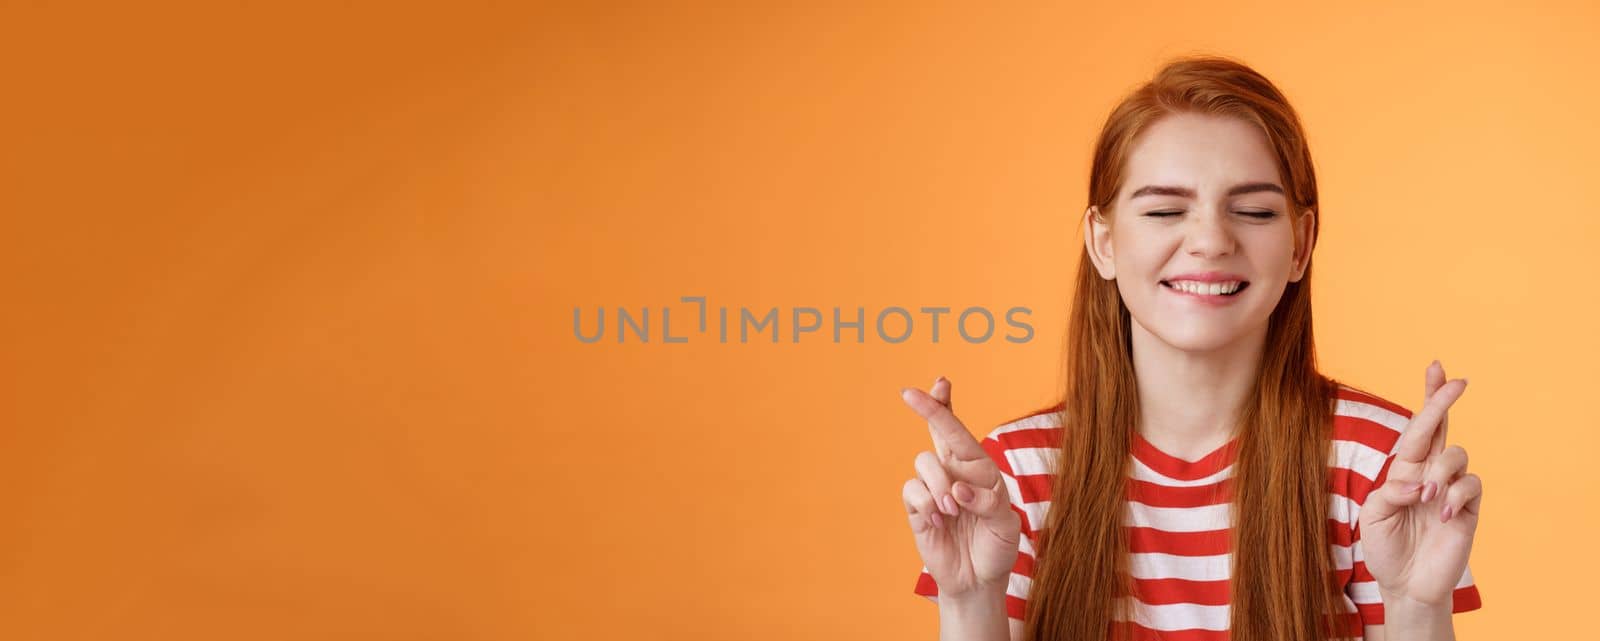 Hopeful optimistic cheerful ginger girl believe dream come true, close eyes cross fingers good luck, making wish, anticipating positive good fortune, stand orange background smiling daydreaming.